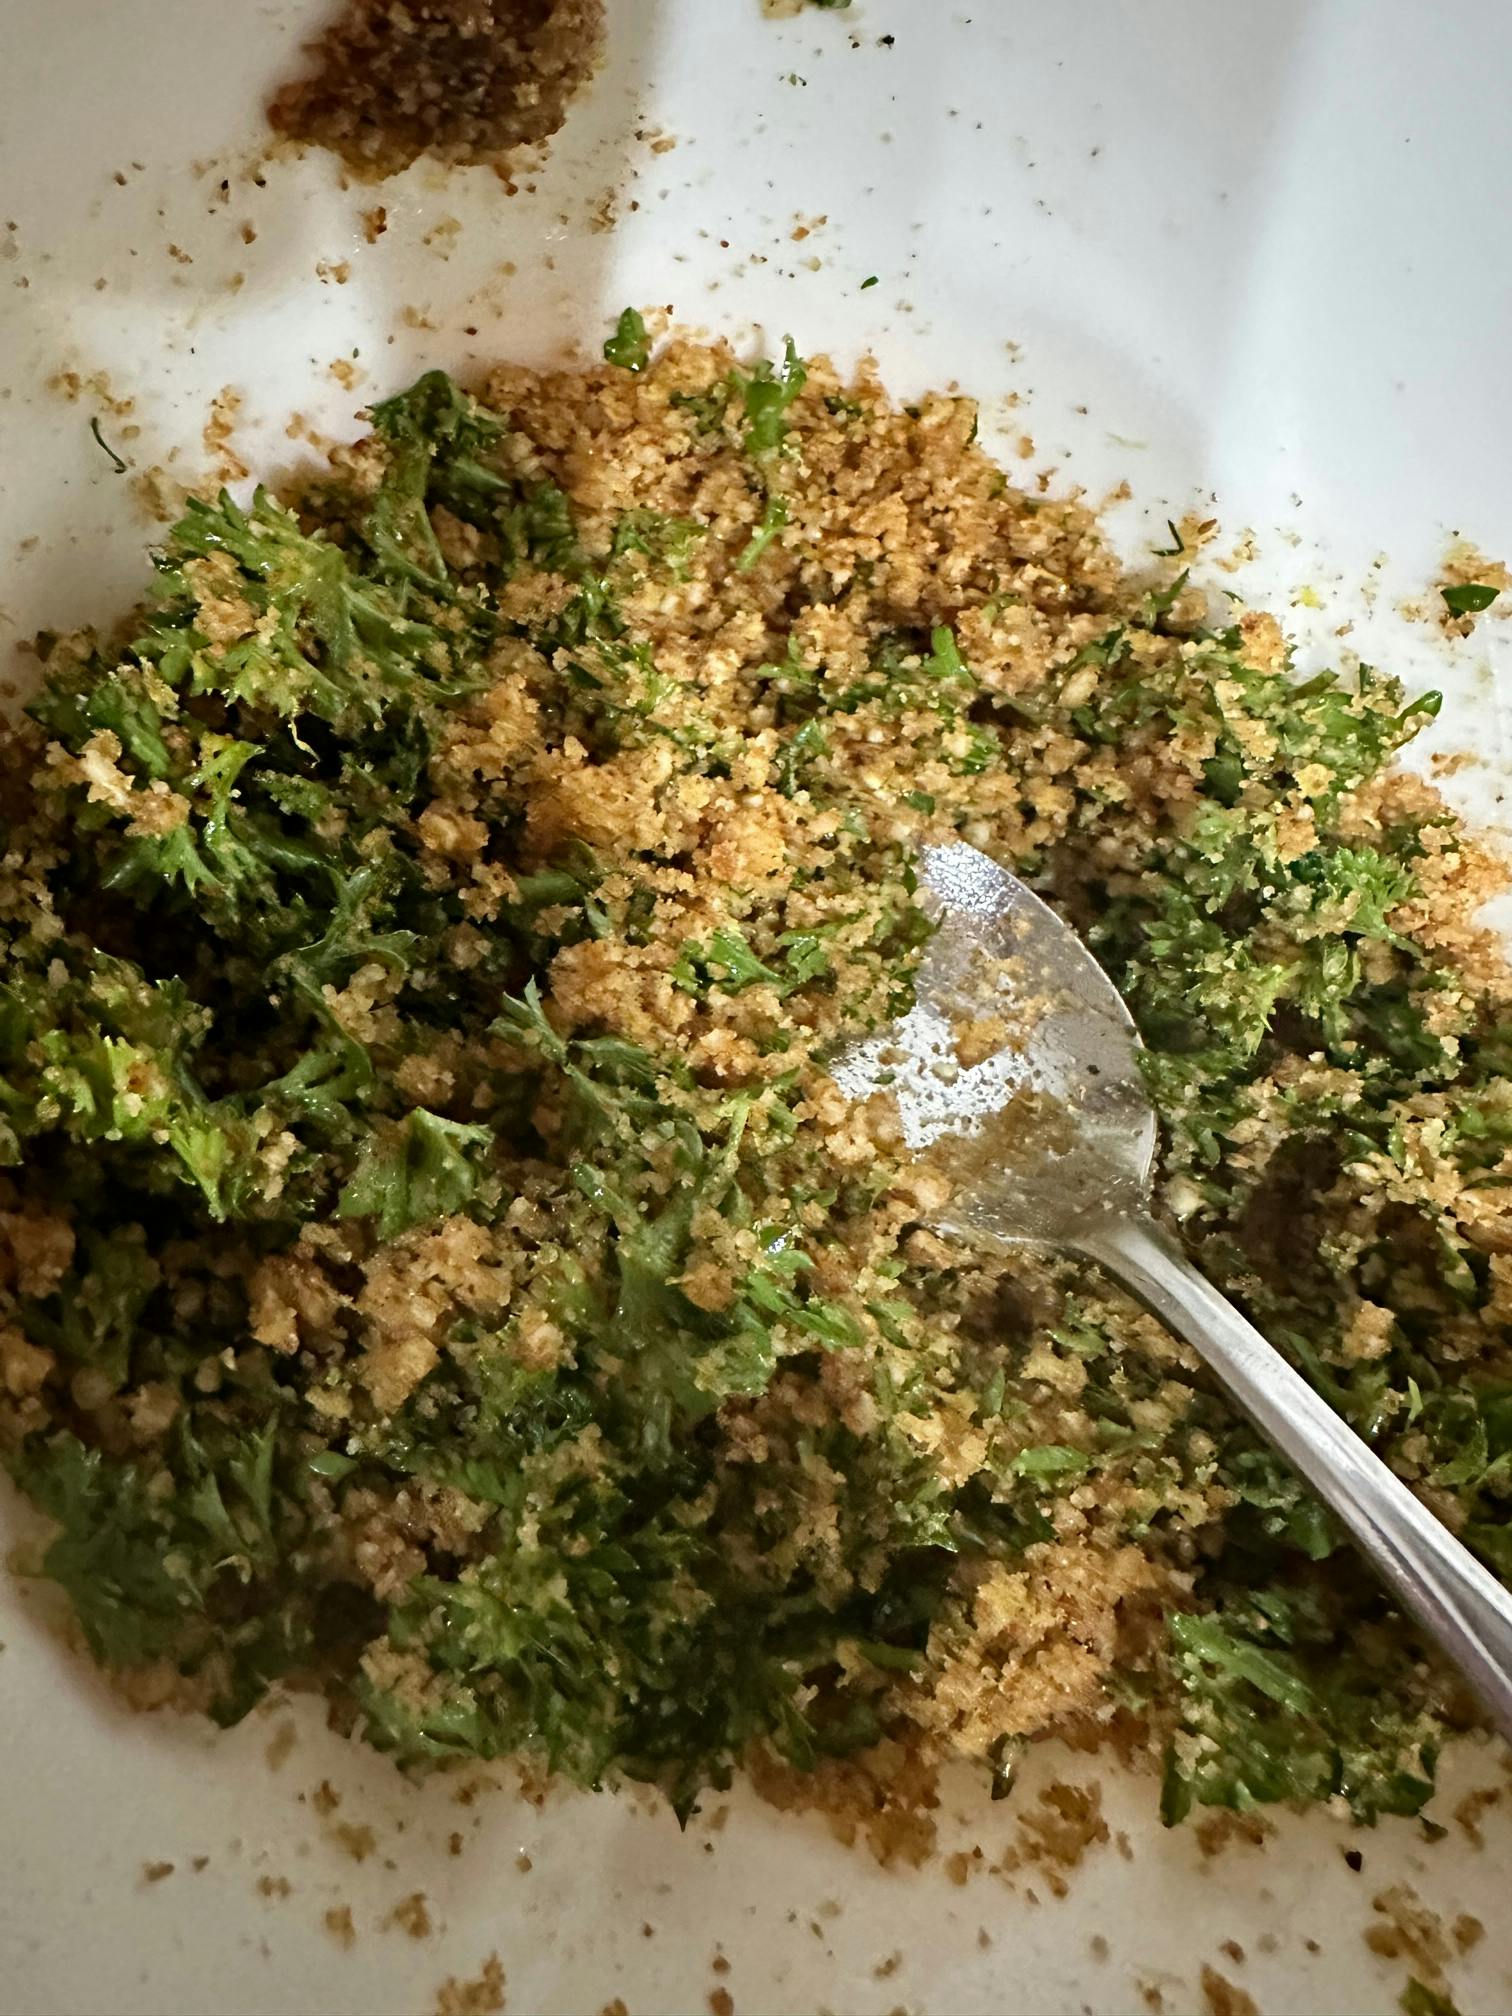 A Picture showing Gremolata being made